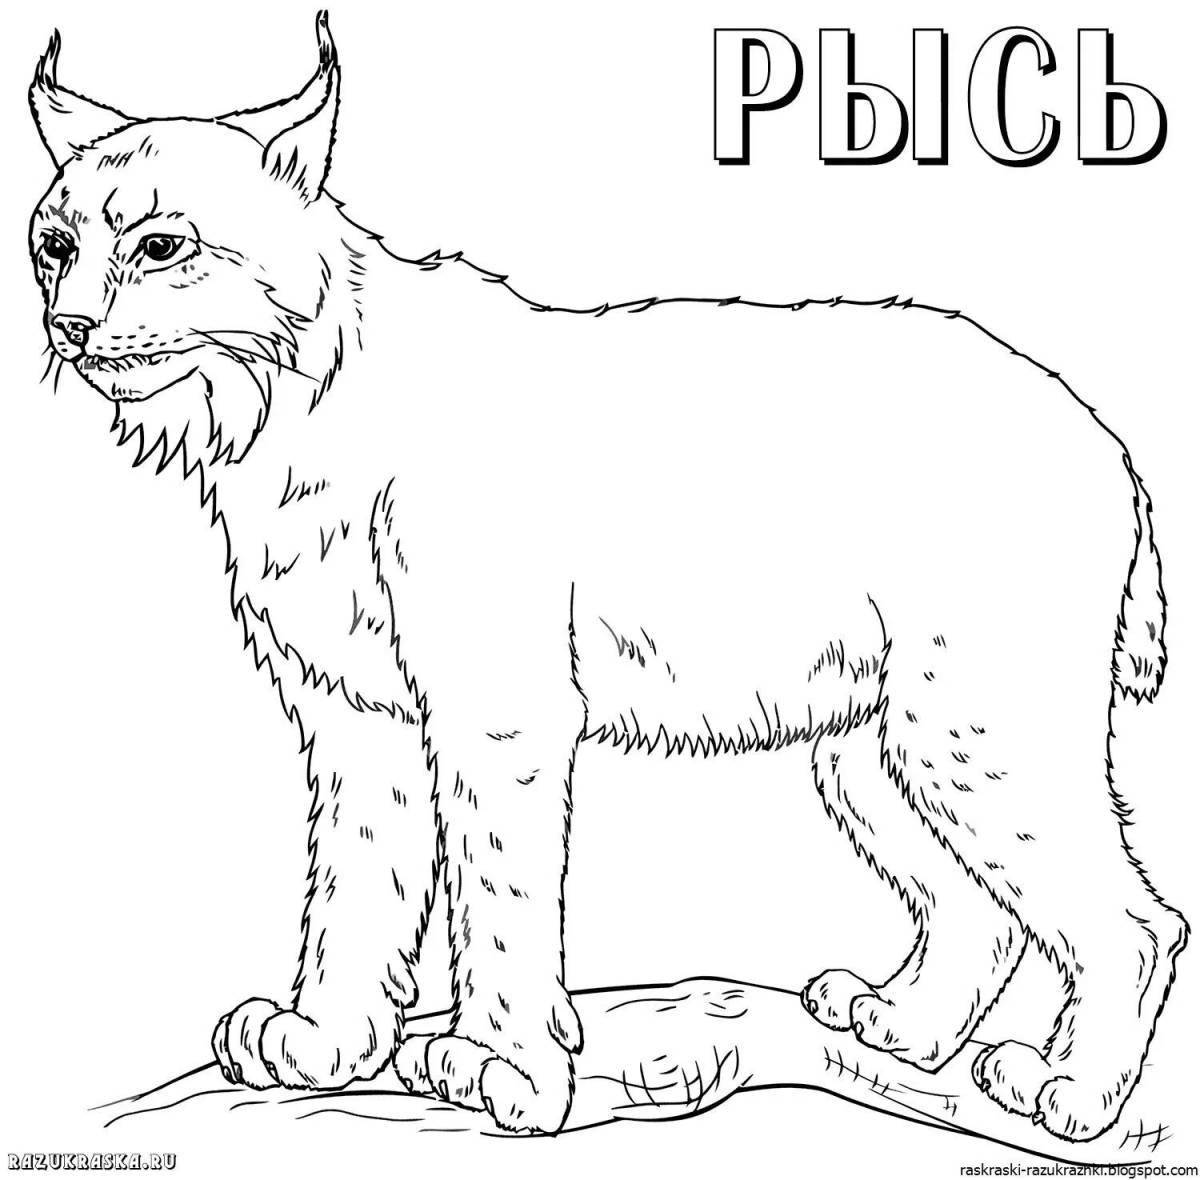 A fun coloring page for Russian animals for kids